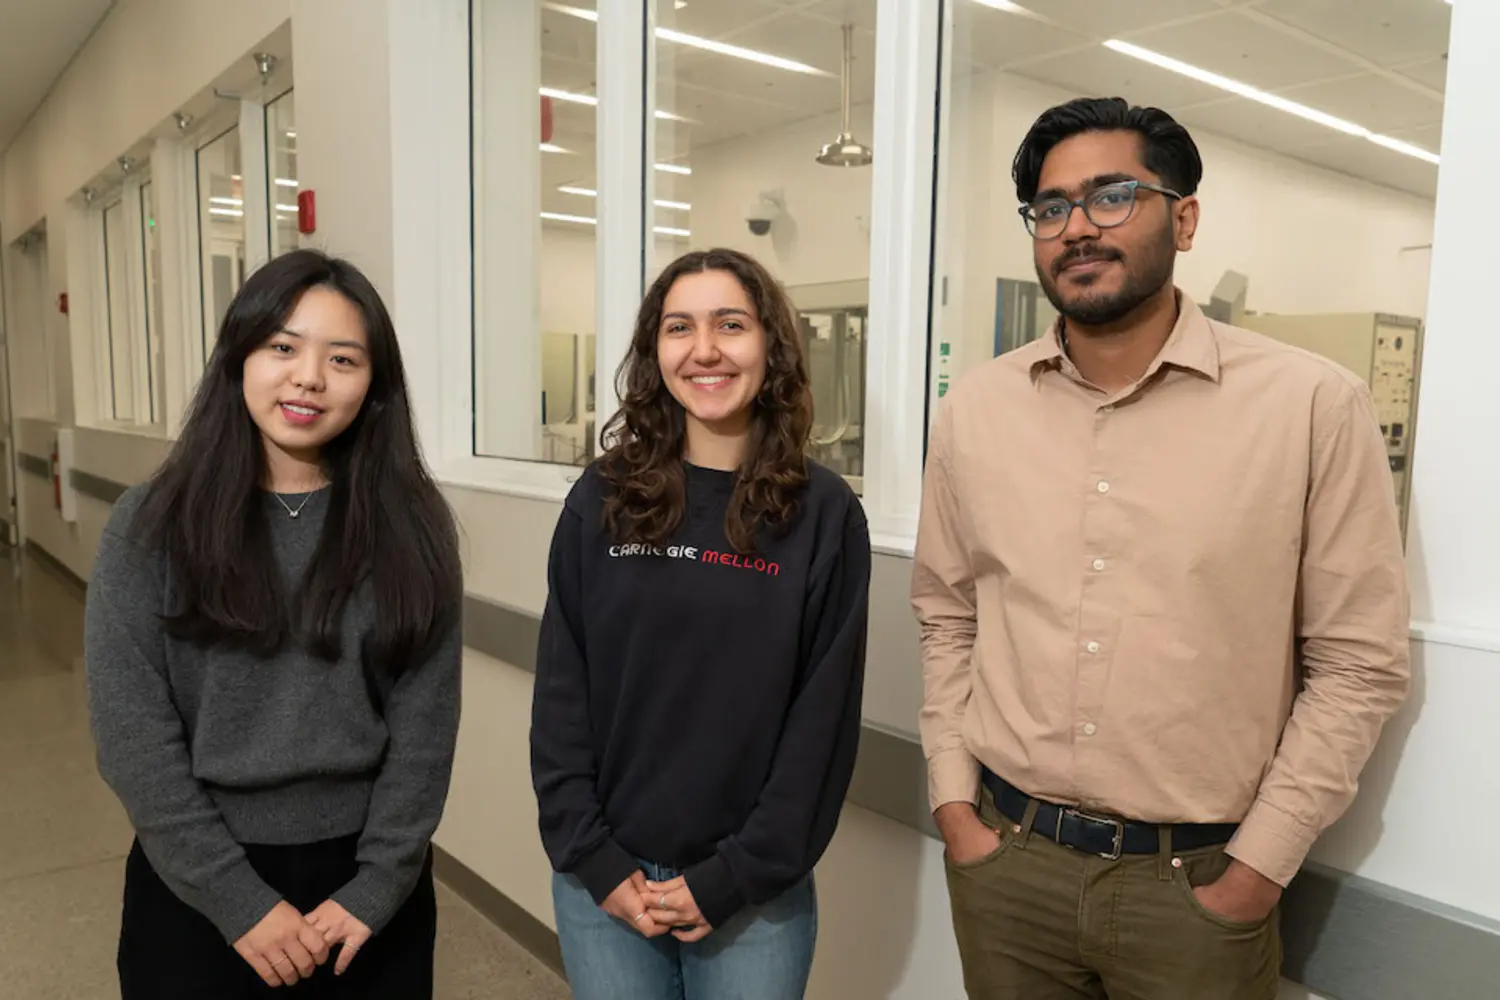 Students Sona Marukyan (MSE/BME), Gaurav Balakrishnan (MSE), and Julie Shin Kim (ChemE) were among the students who contributed to this research.